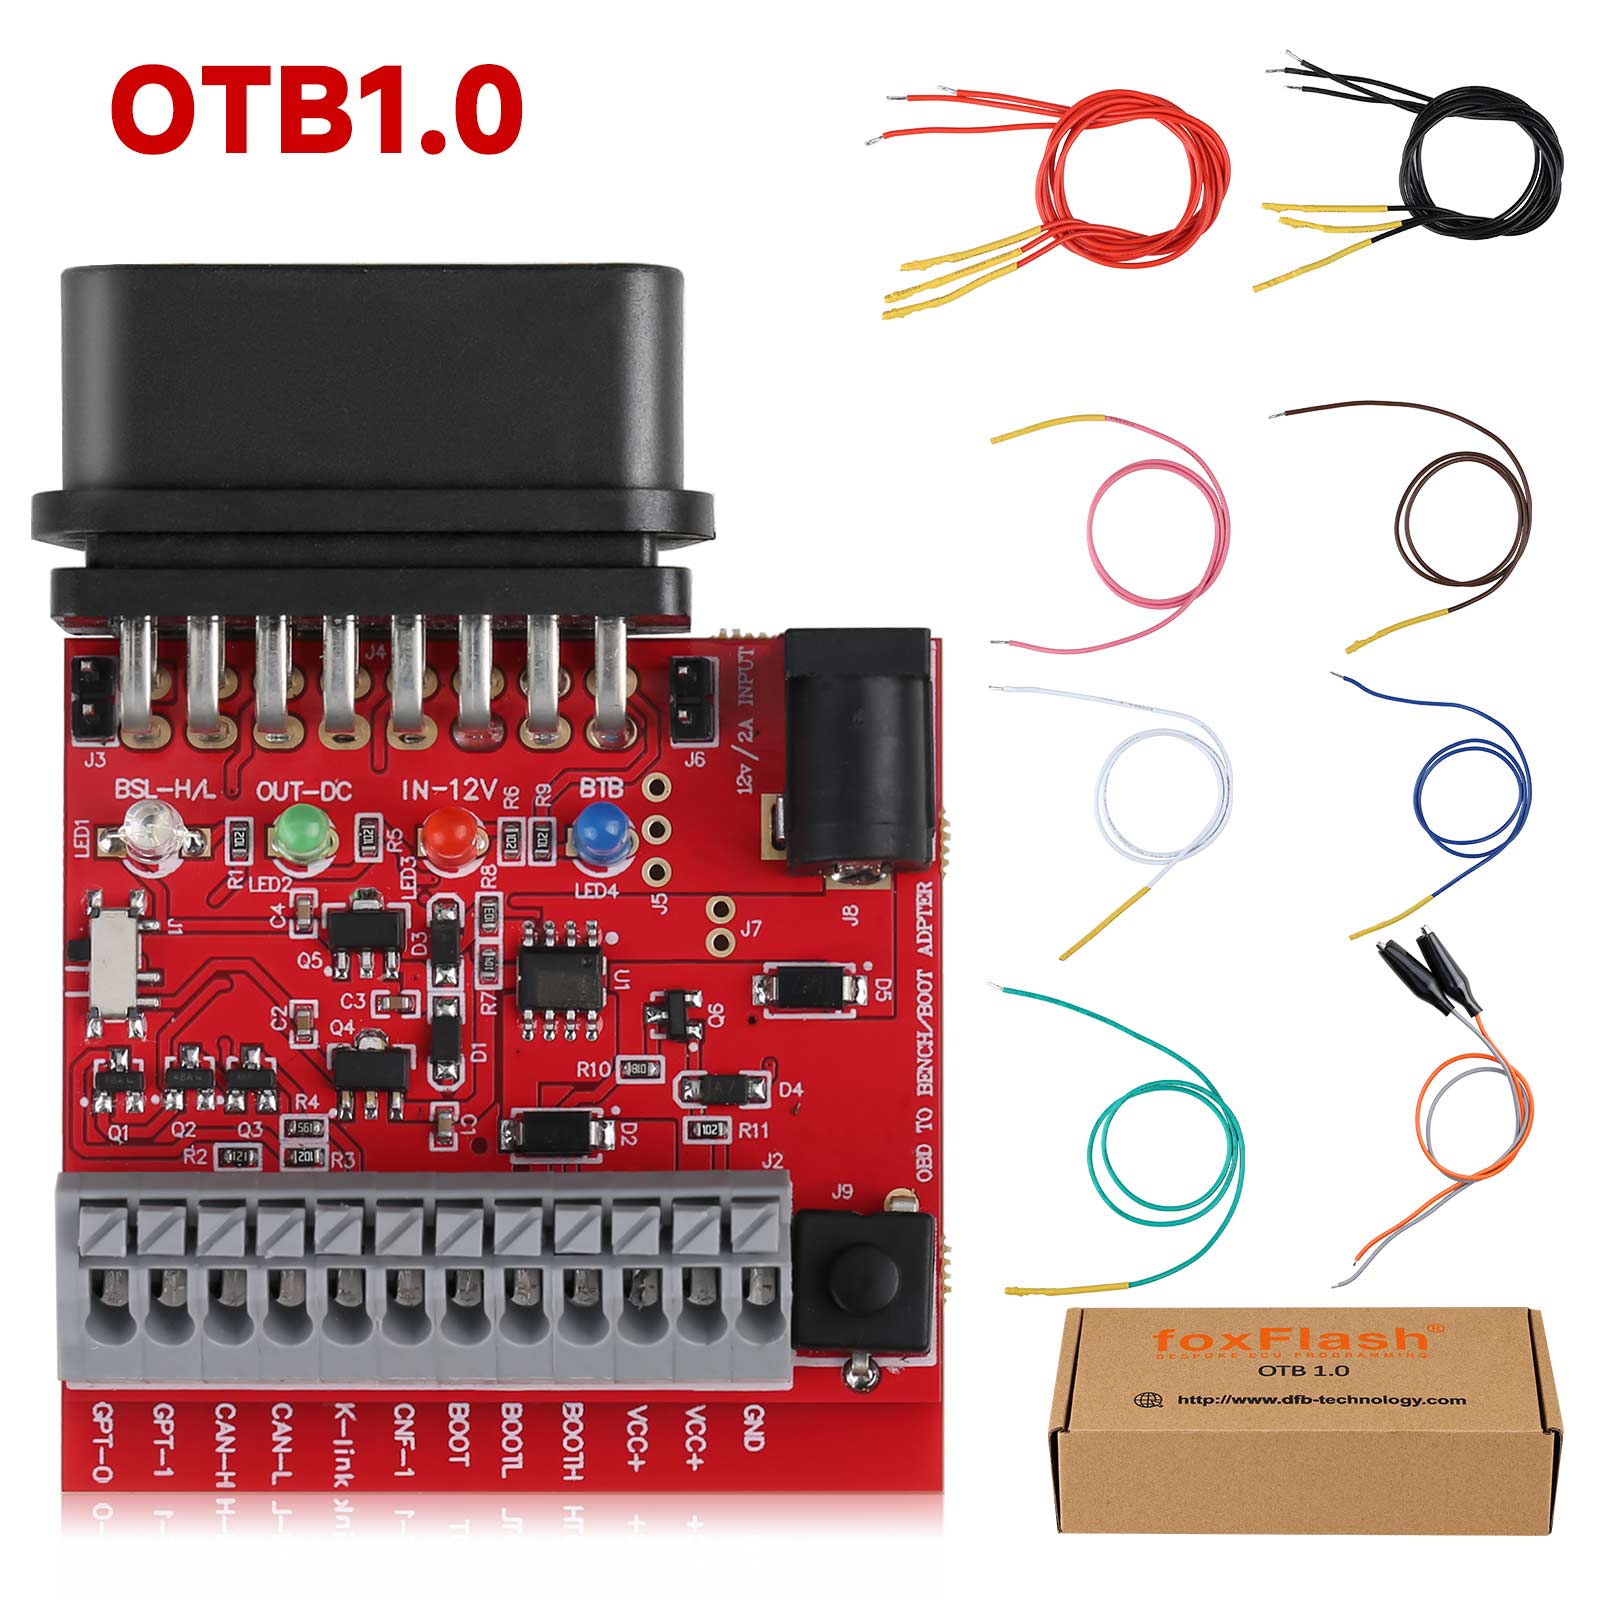 FoxFlash OTB 1.0 Expansion Adapter Package List